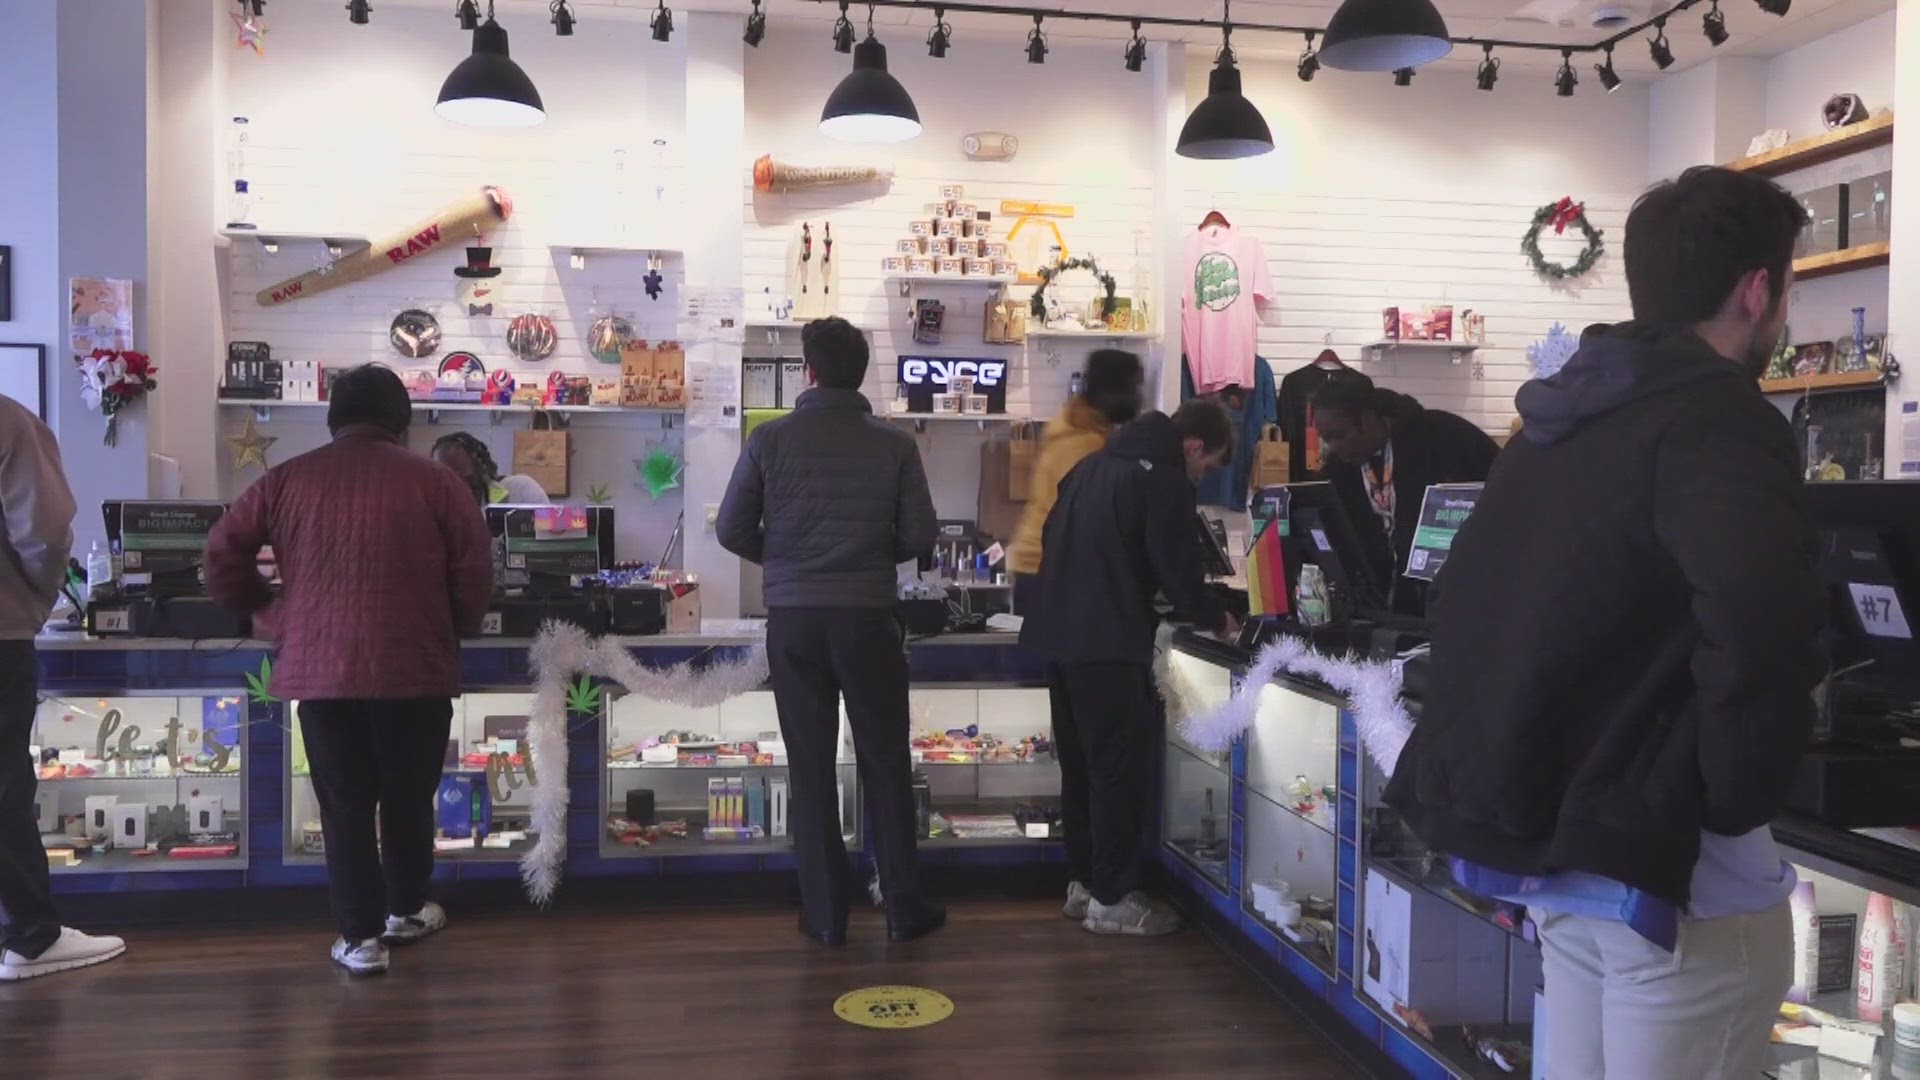 The D.C. council unanimously passed emergency legislation that could penalize unlicensed gifting shops that have not applied to the city’s medical marijuana program.